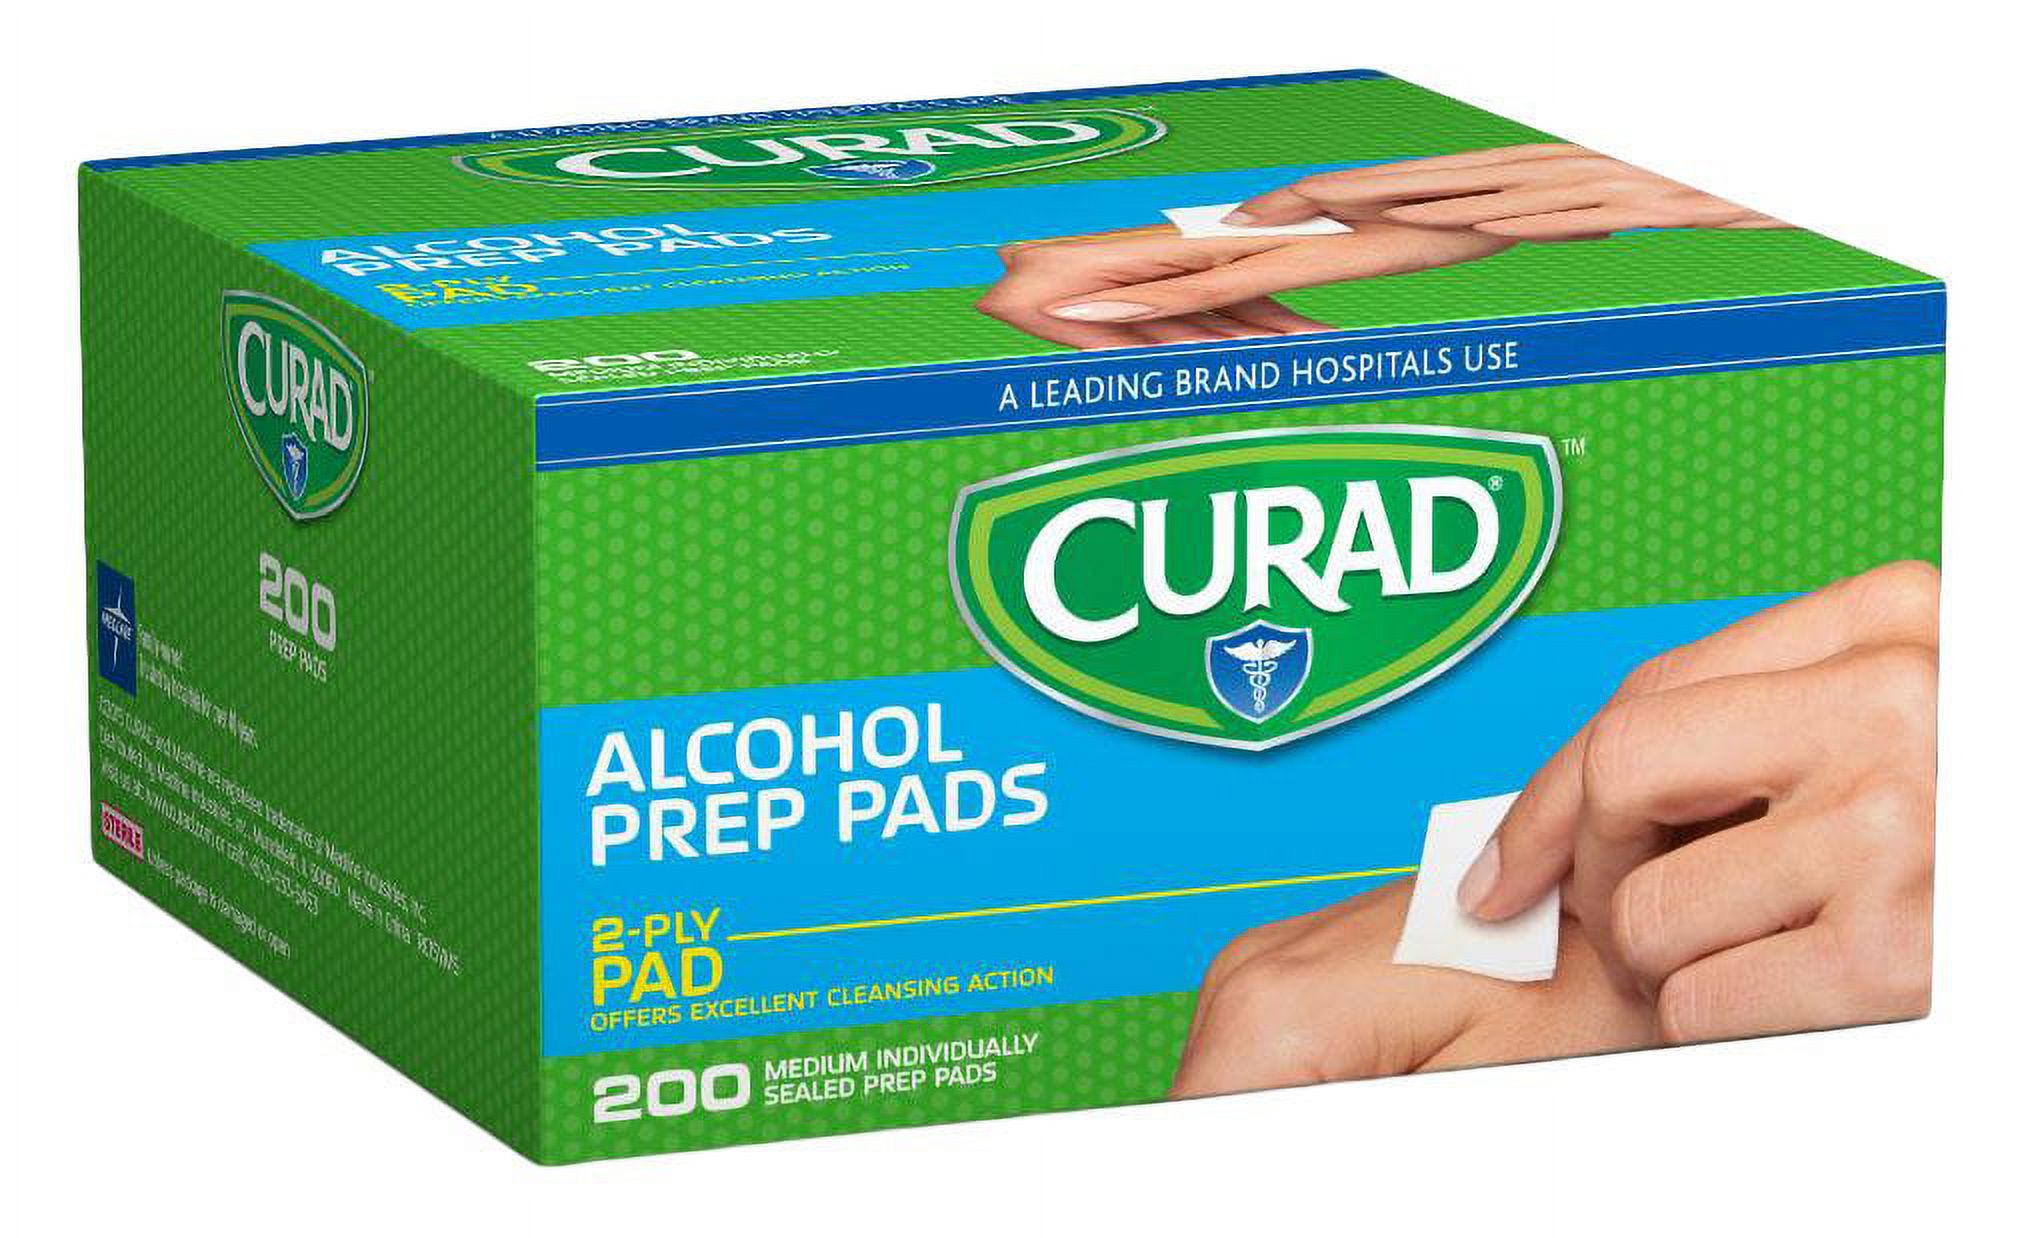 Curad 2-Ply Alcohol Prep Pads, 200 count - image 4 of 4